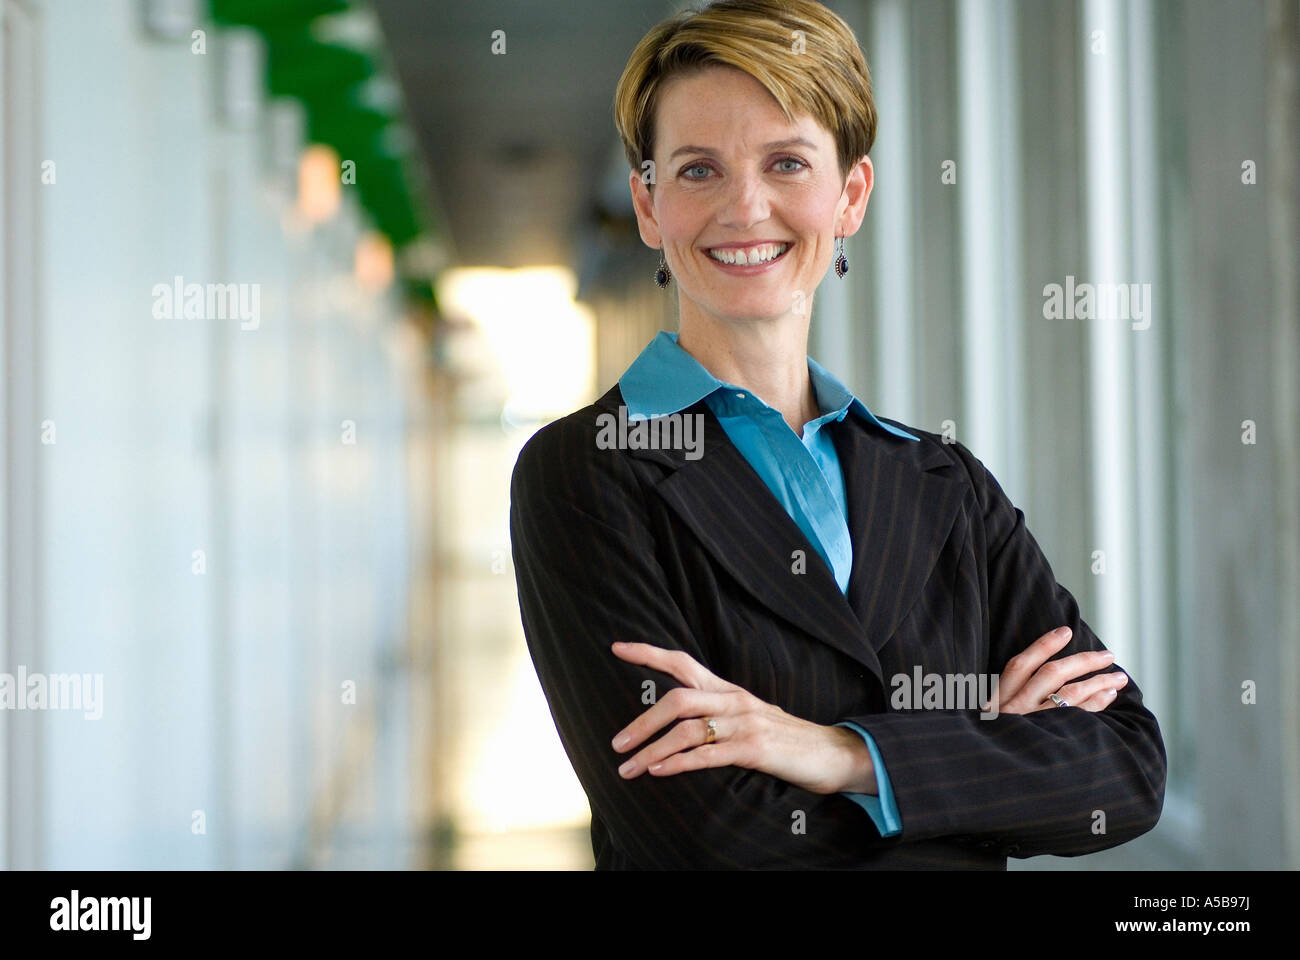 Professional female business executive folding arms while standing in office hallway. Stock Photo